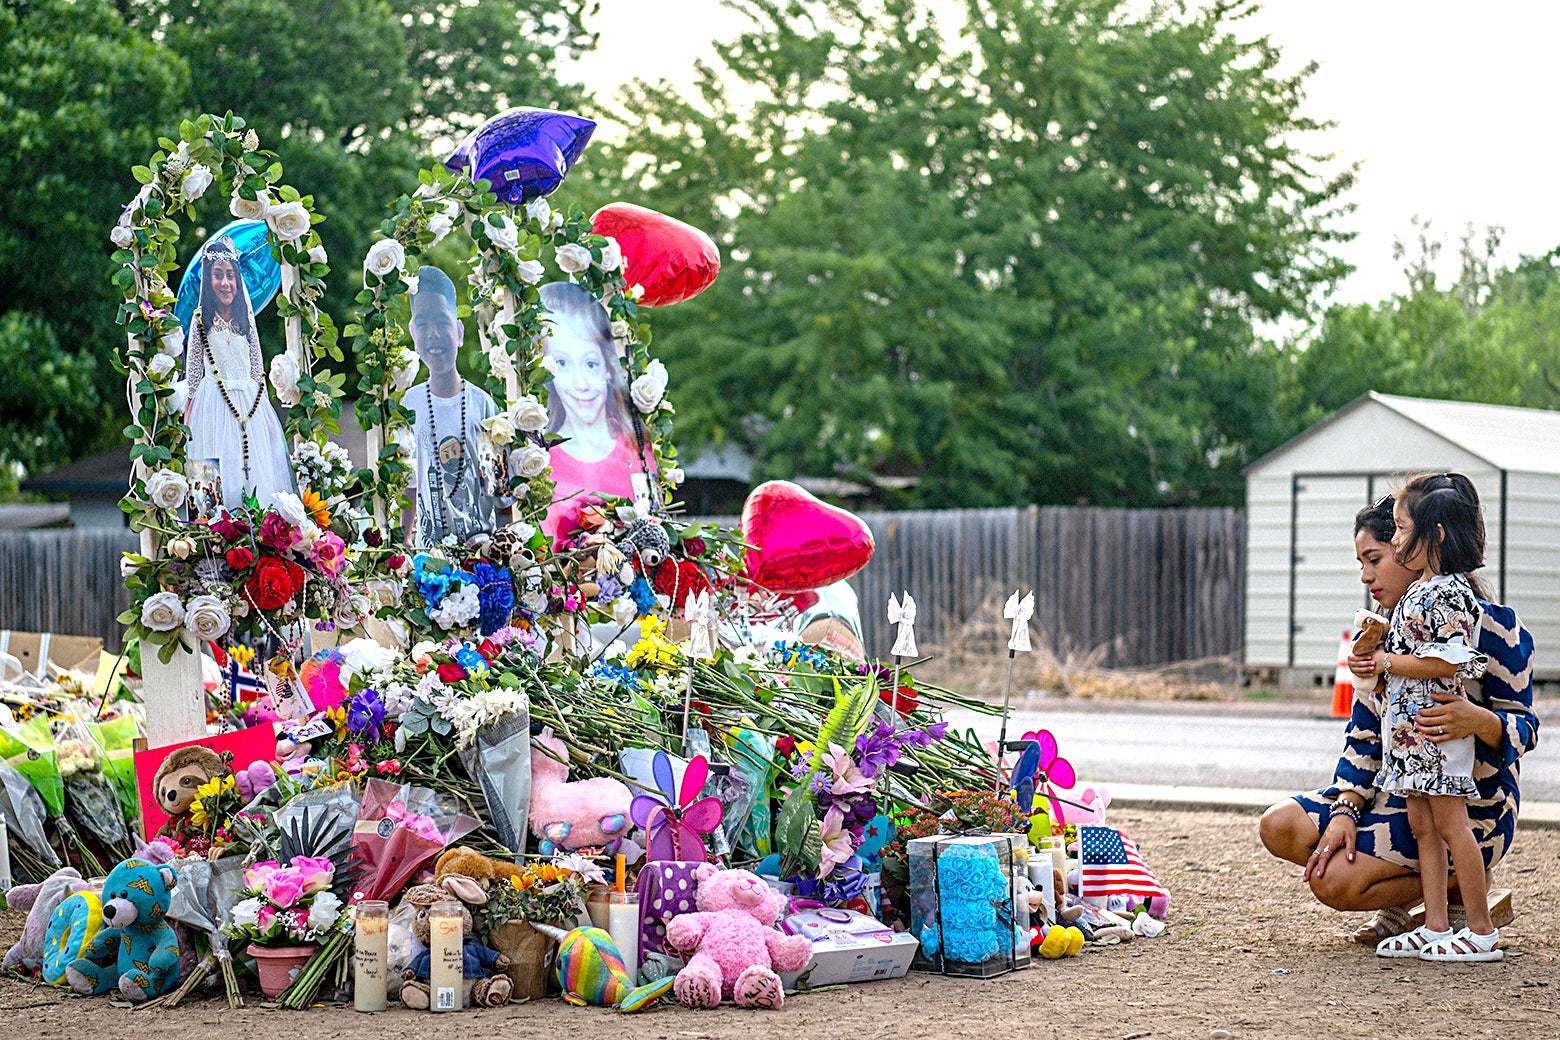 A woman crouches next to a young girl as they look at a memorial of flowers, stuffed animals, angels, candles, and photographs of the victims.